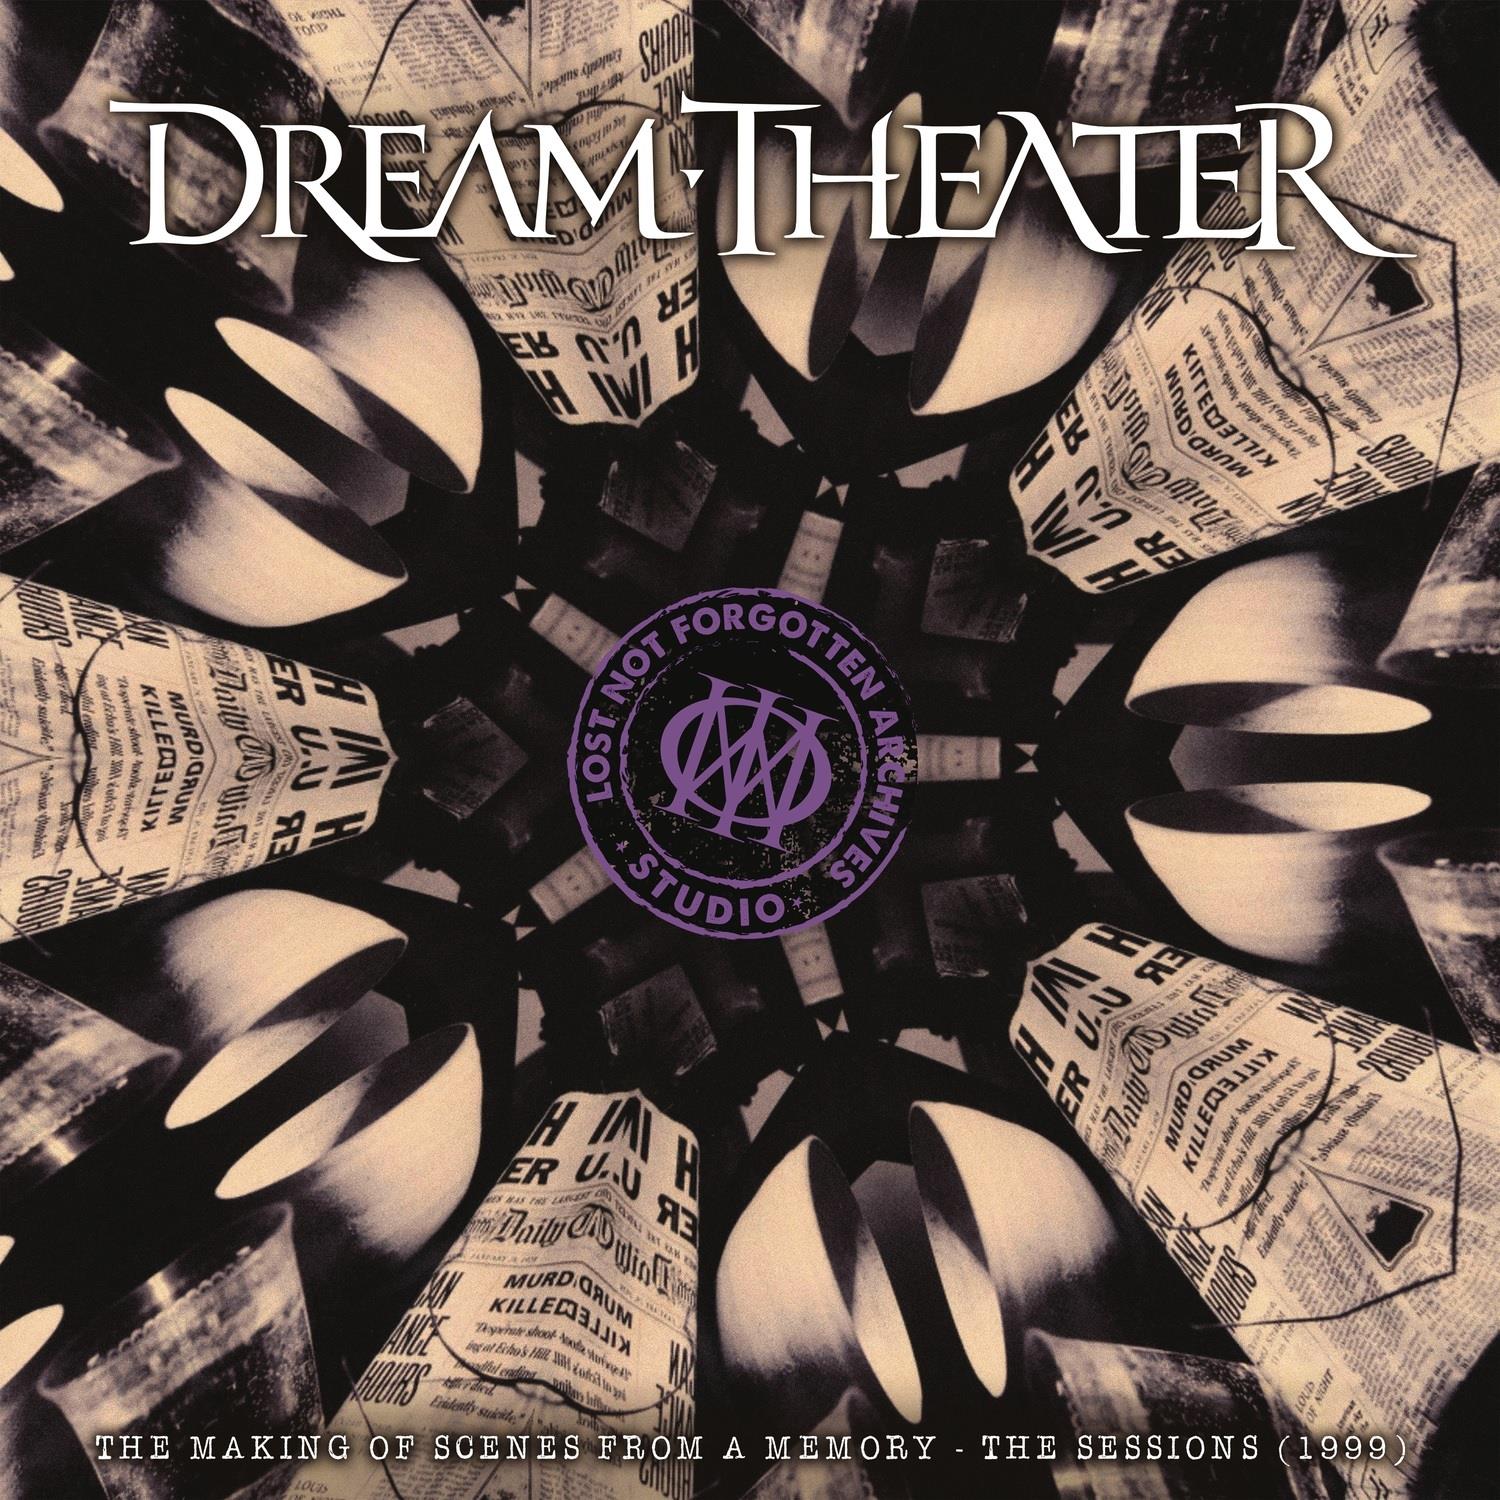 Lost Not Forgotten Archives: The Making Of Scenes From A Memory - The Sessions (1999) by Dream Theater (CD)